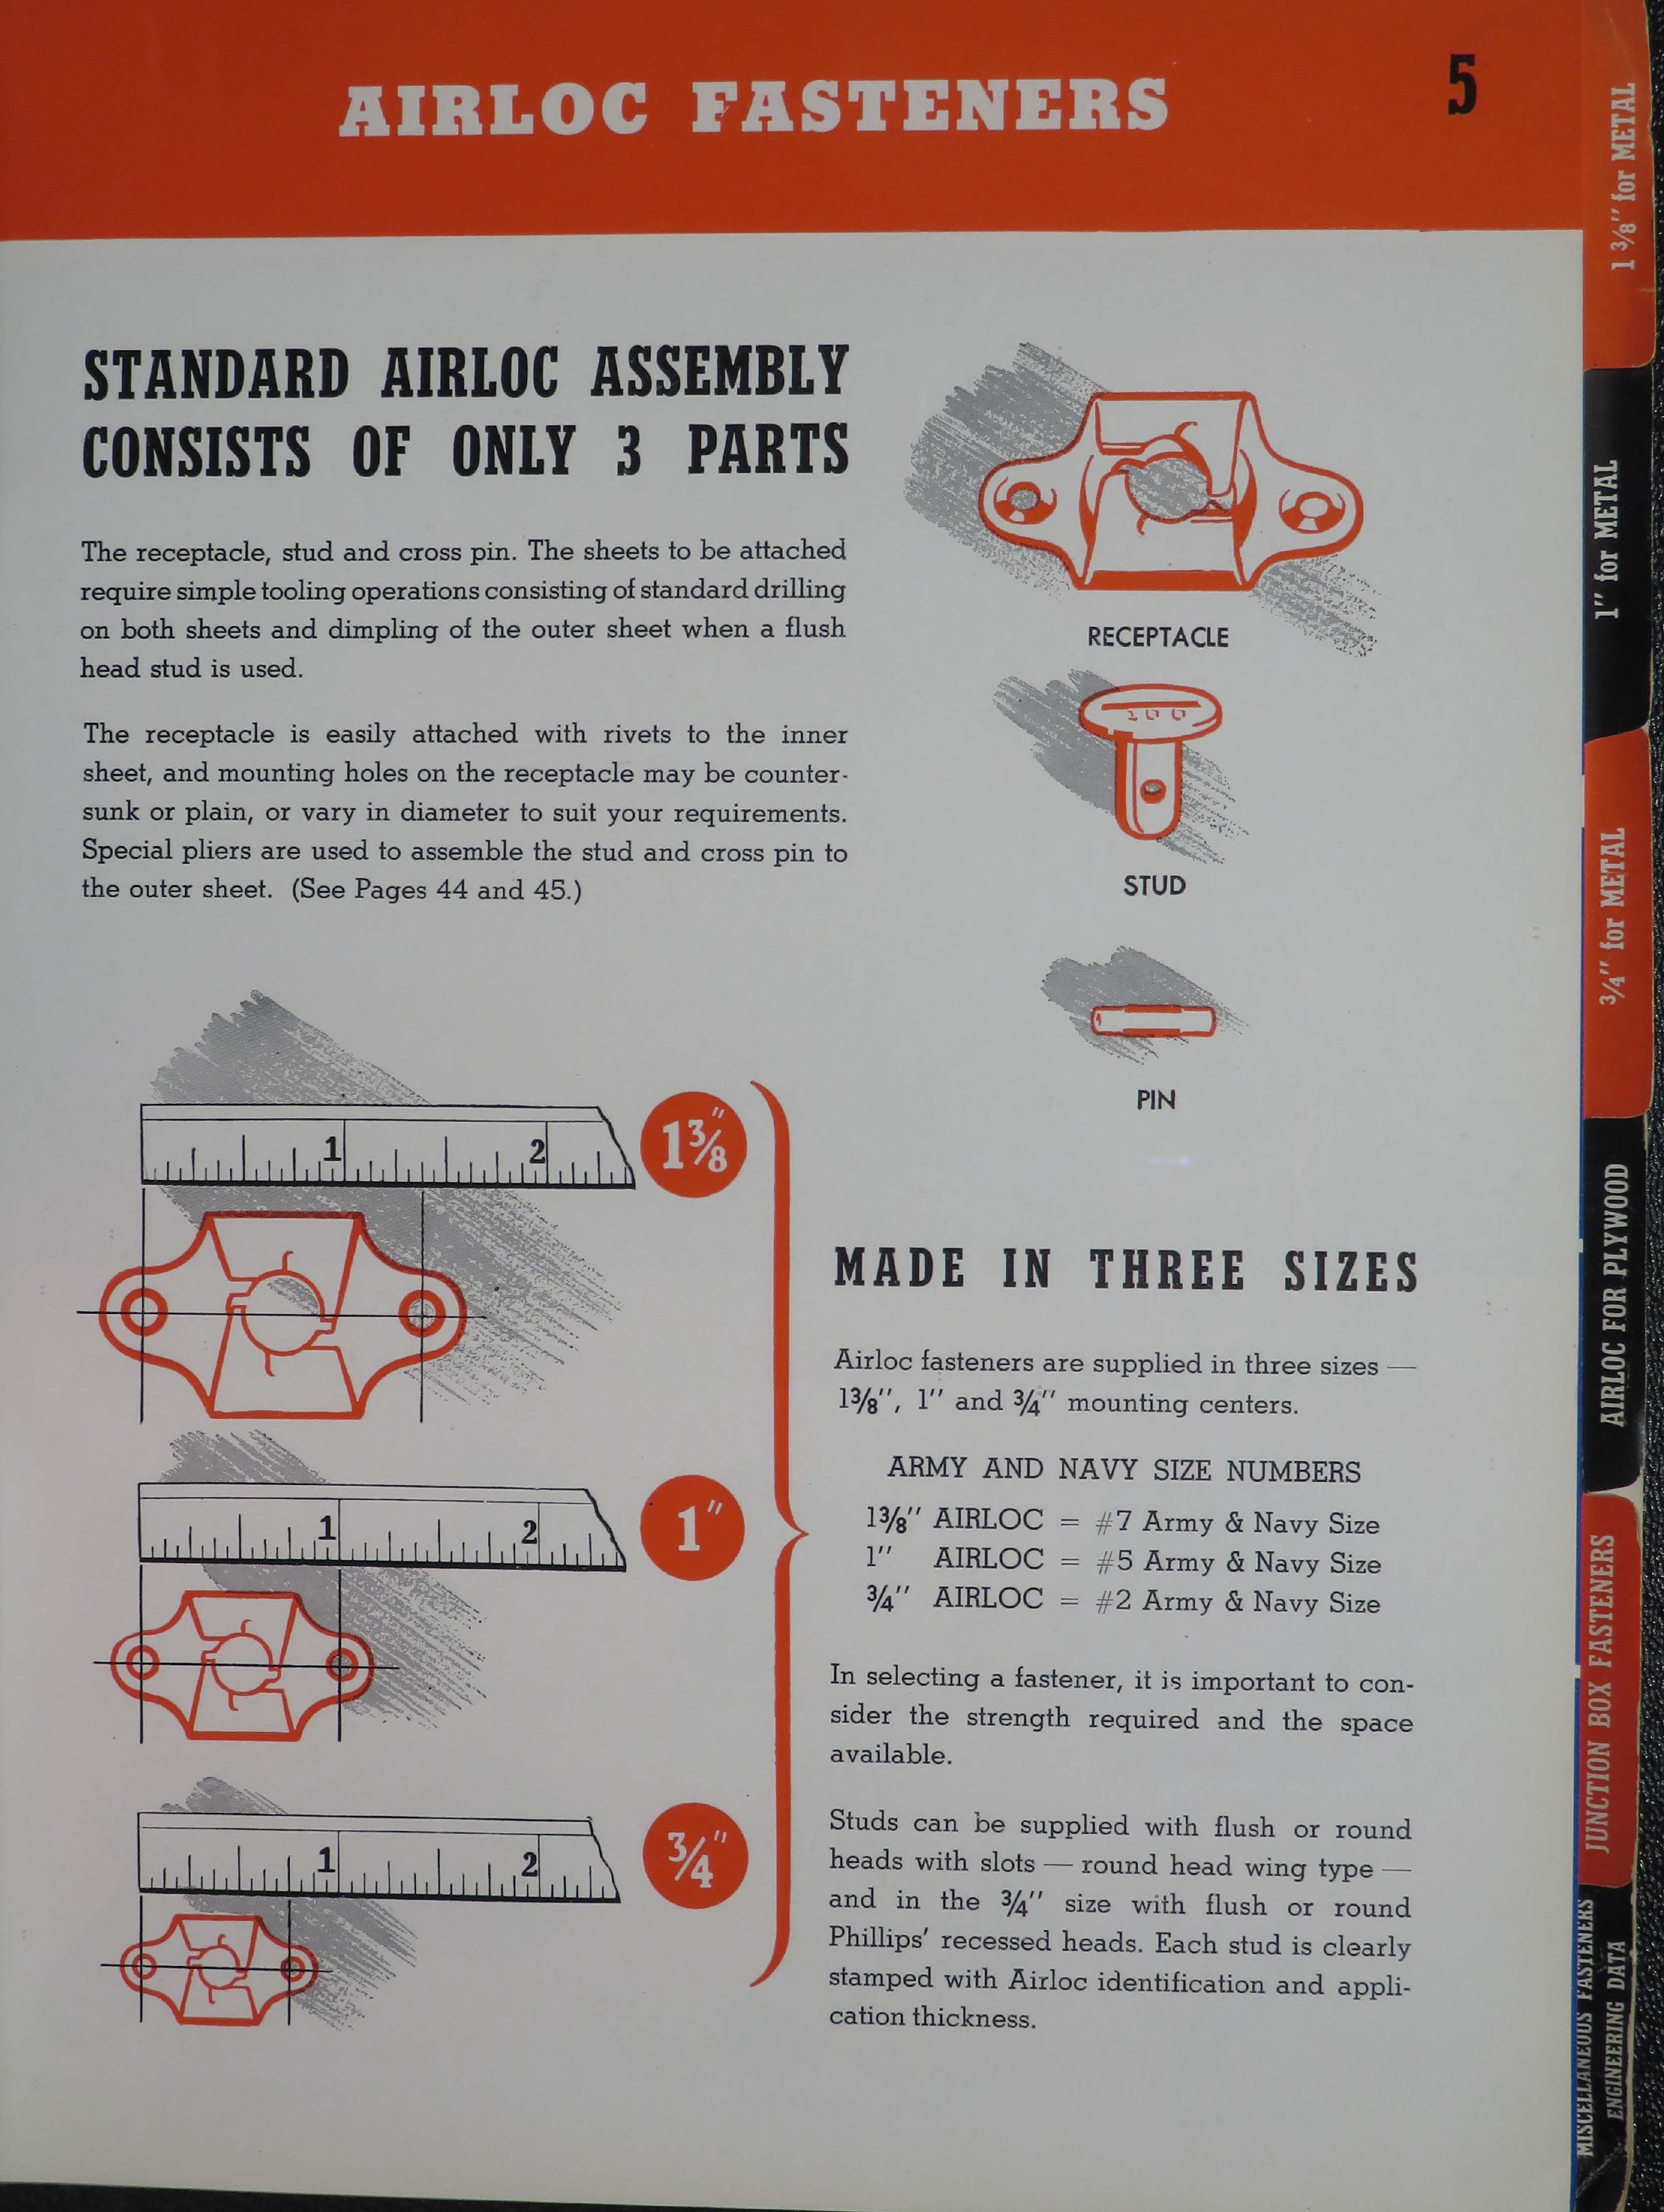 Sample page 7 from AirCorps Library document: Airloc Fasteners